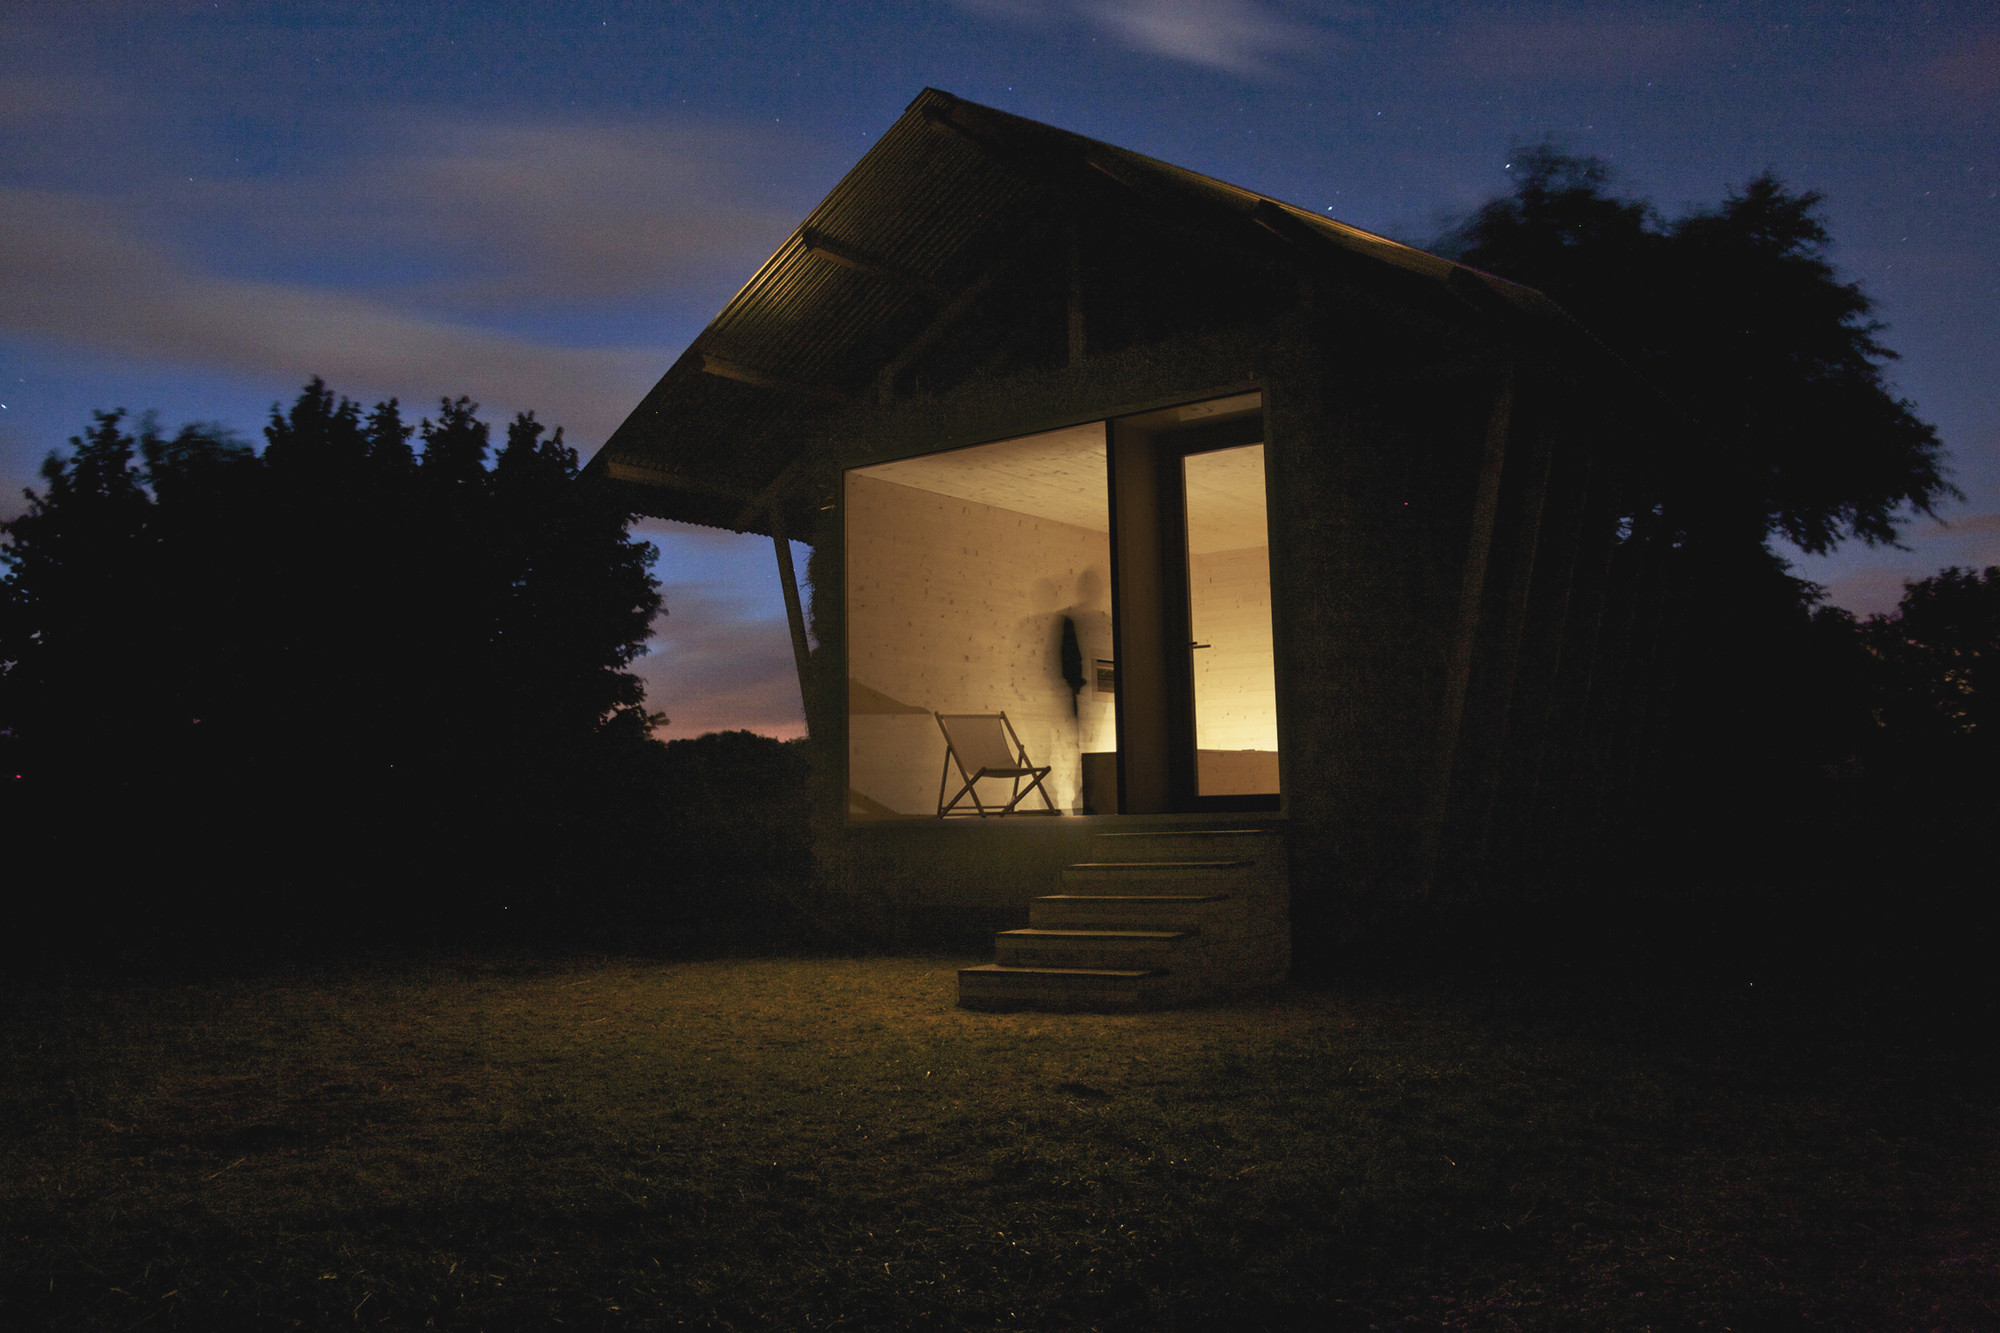 Ecologic Pavilion in Alsace at night